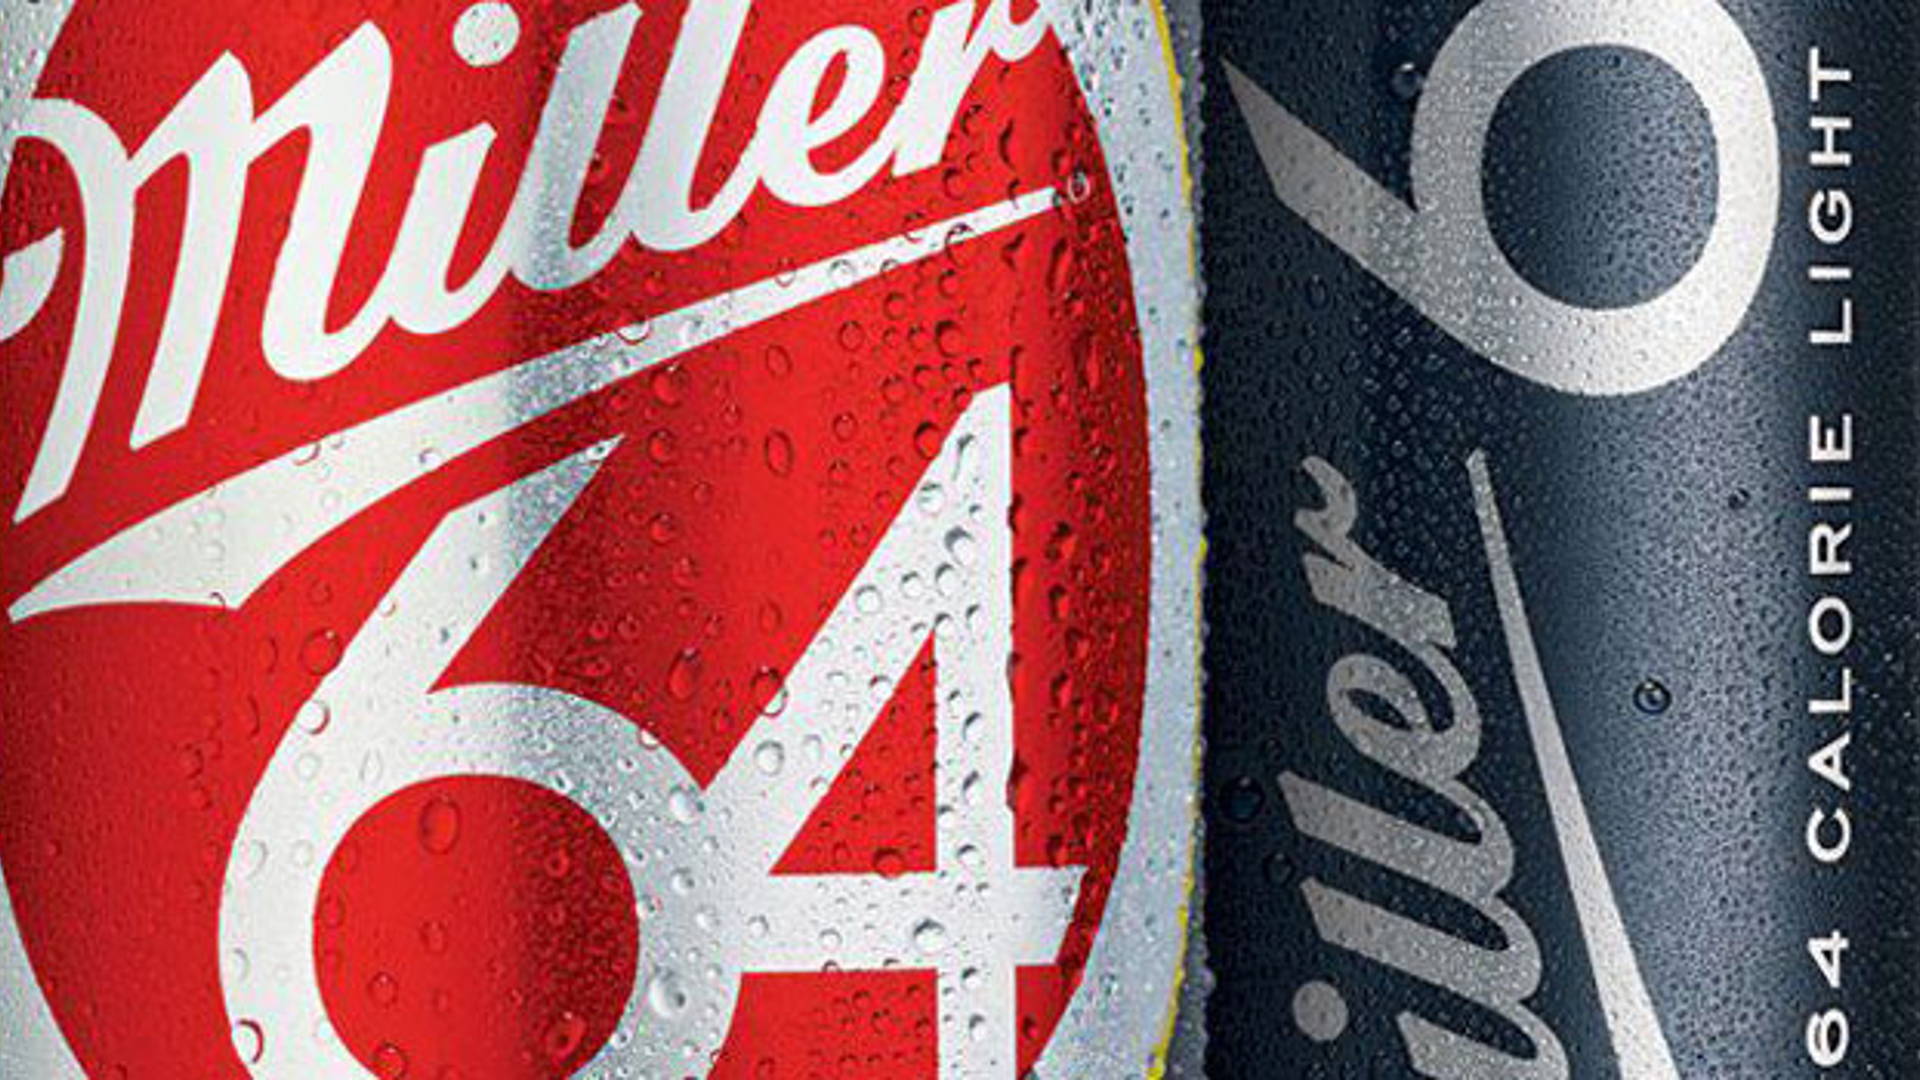 Featured image for Miller64